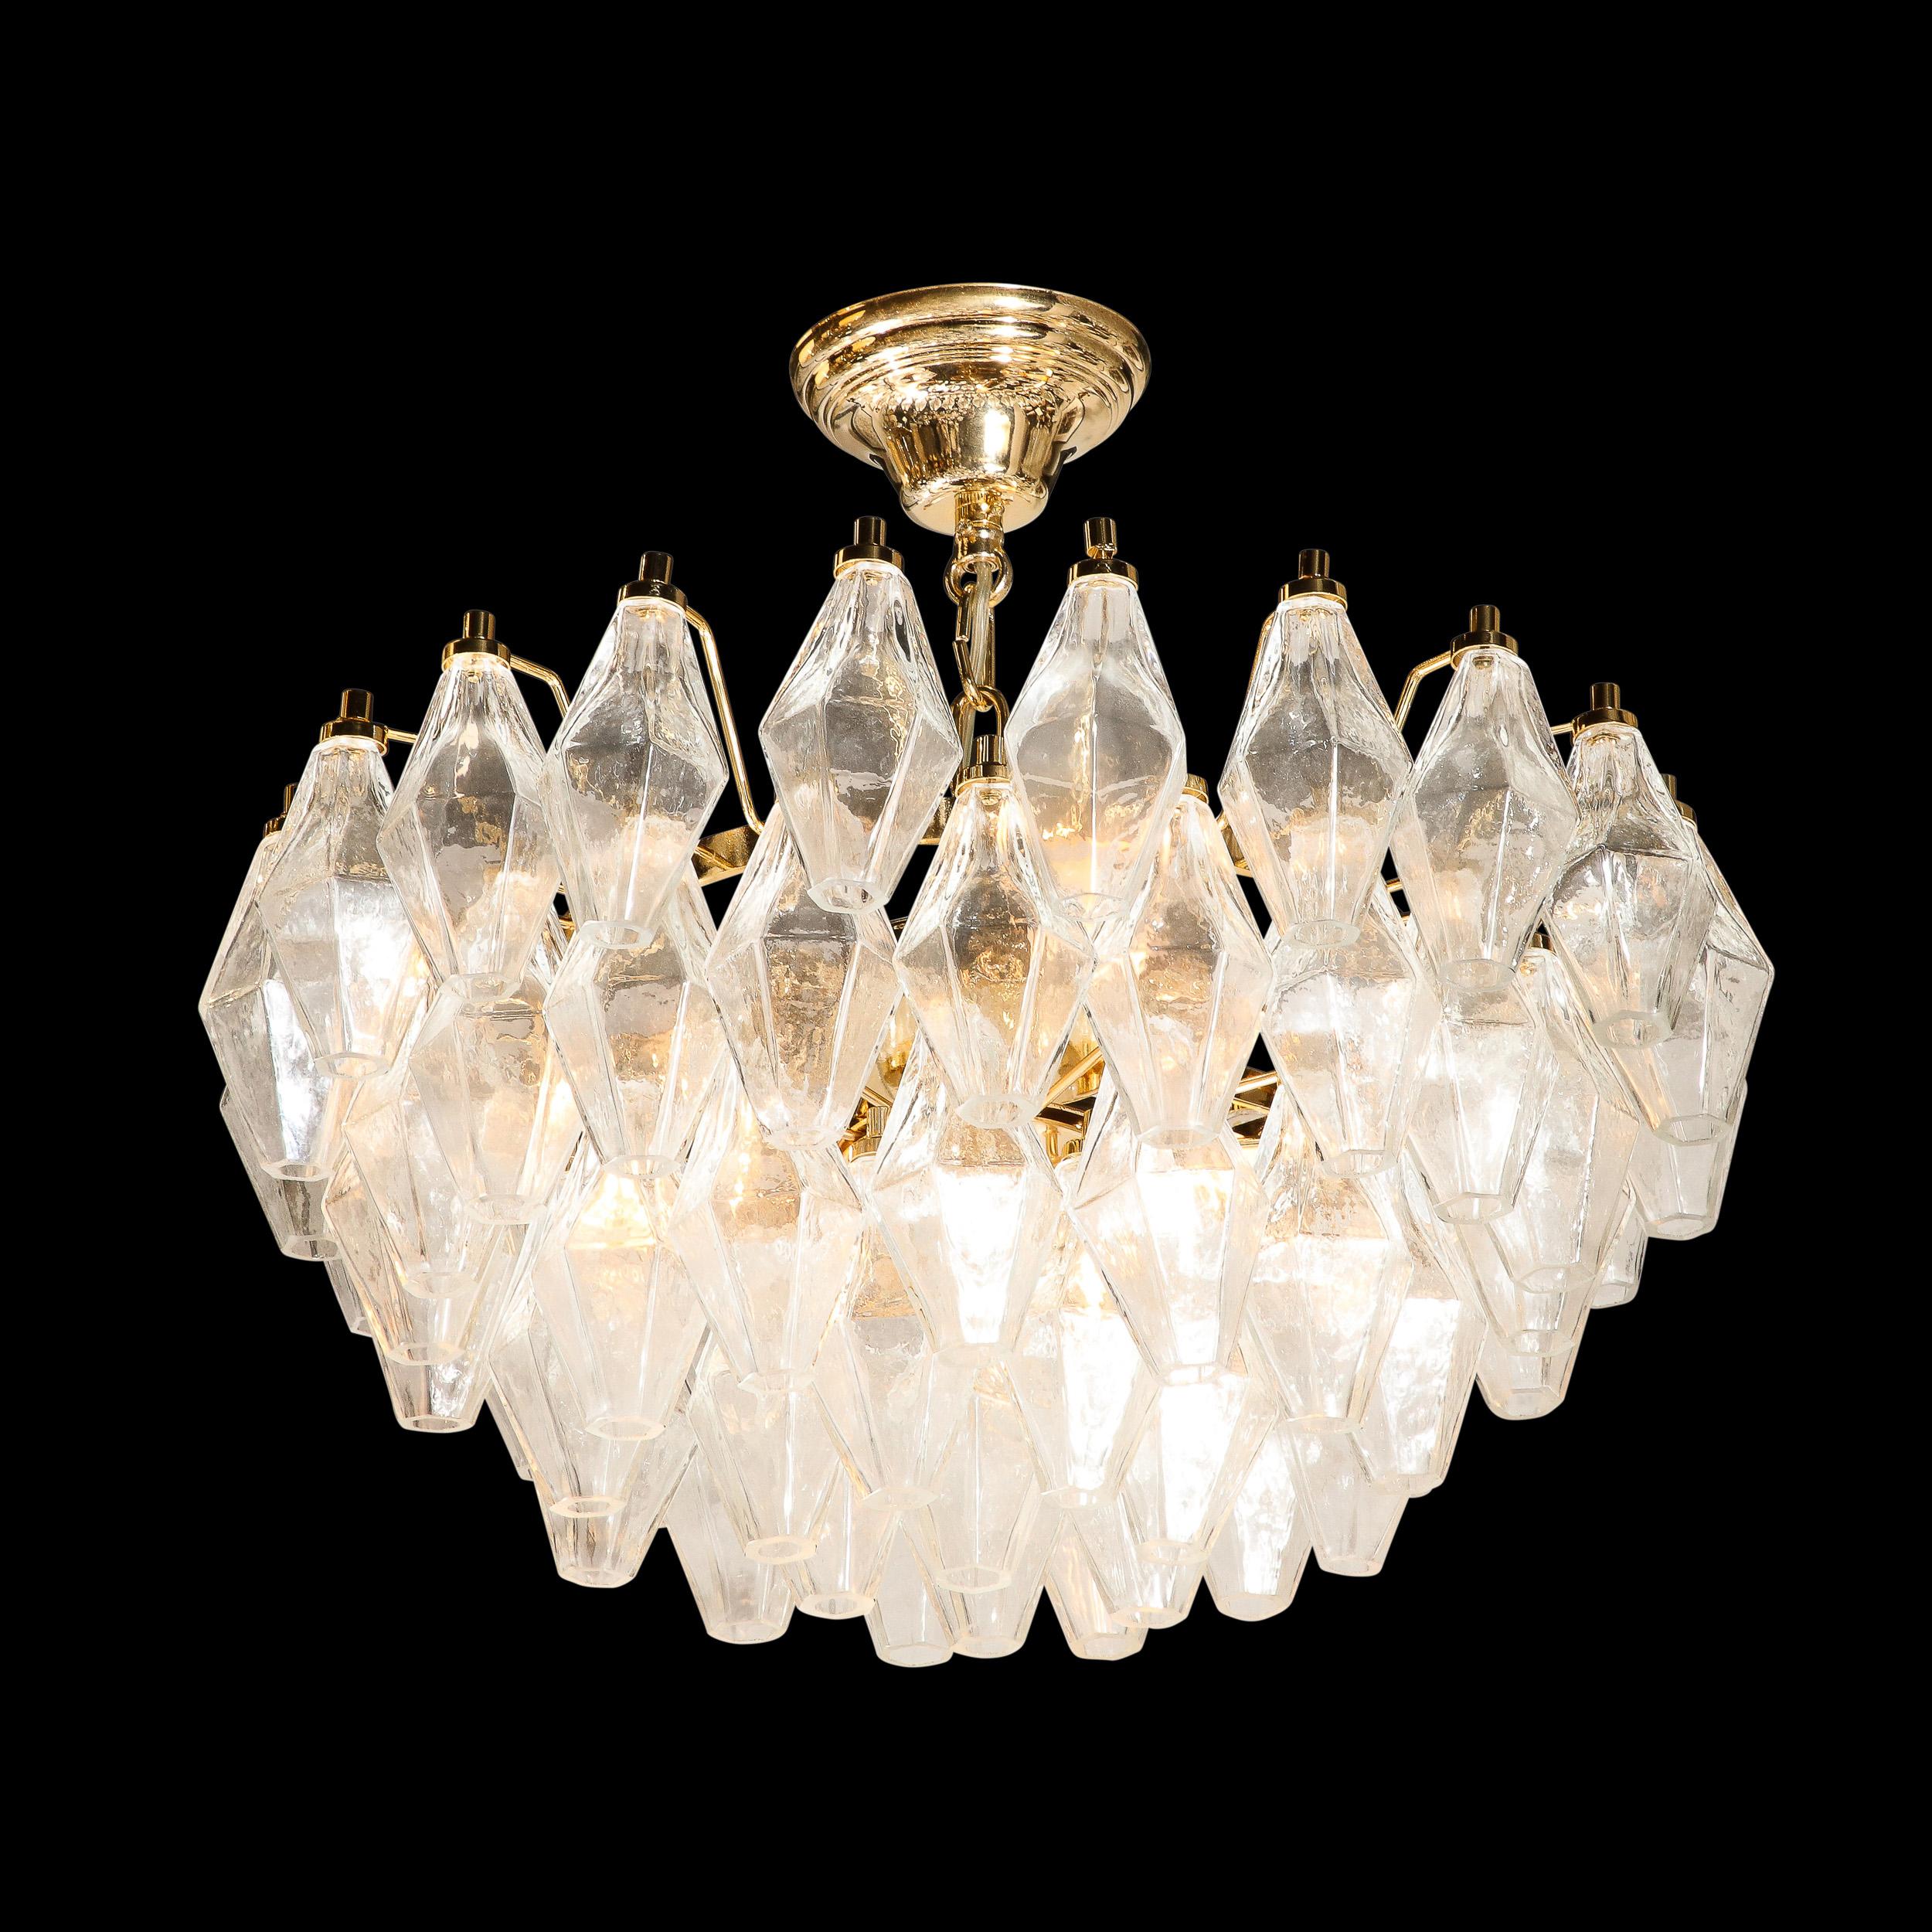 This exceptional Mid-Century Modern polyhedral chandelier was realized in Murano, Italy- the island off the coast of Venice renowned for centuries for its superlative glass production. It offers an abundance of handblown Murano translucent glass